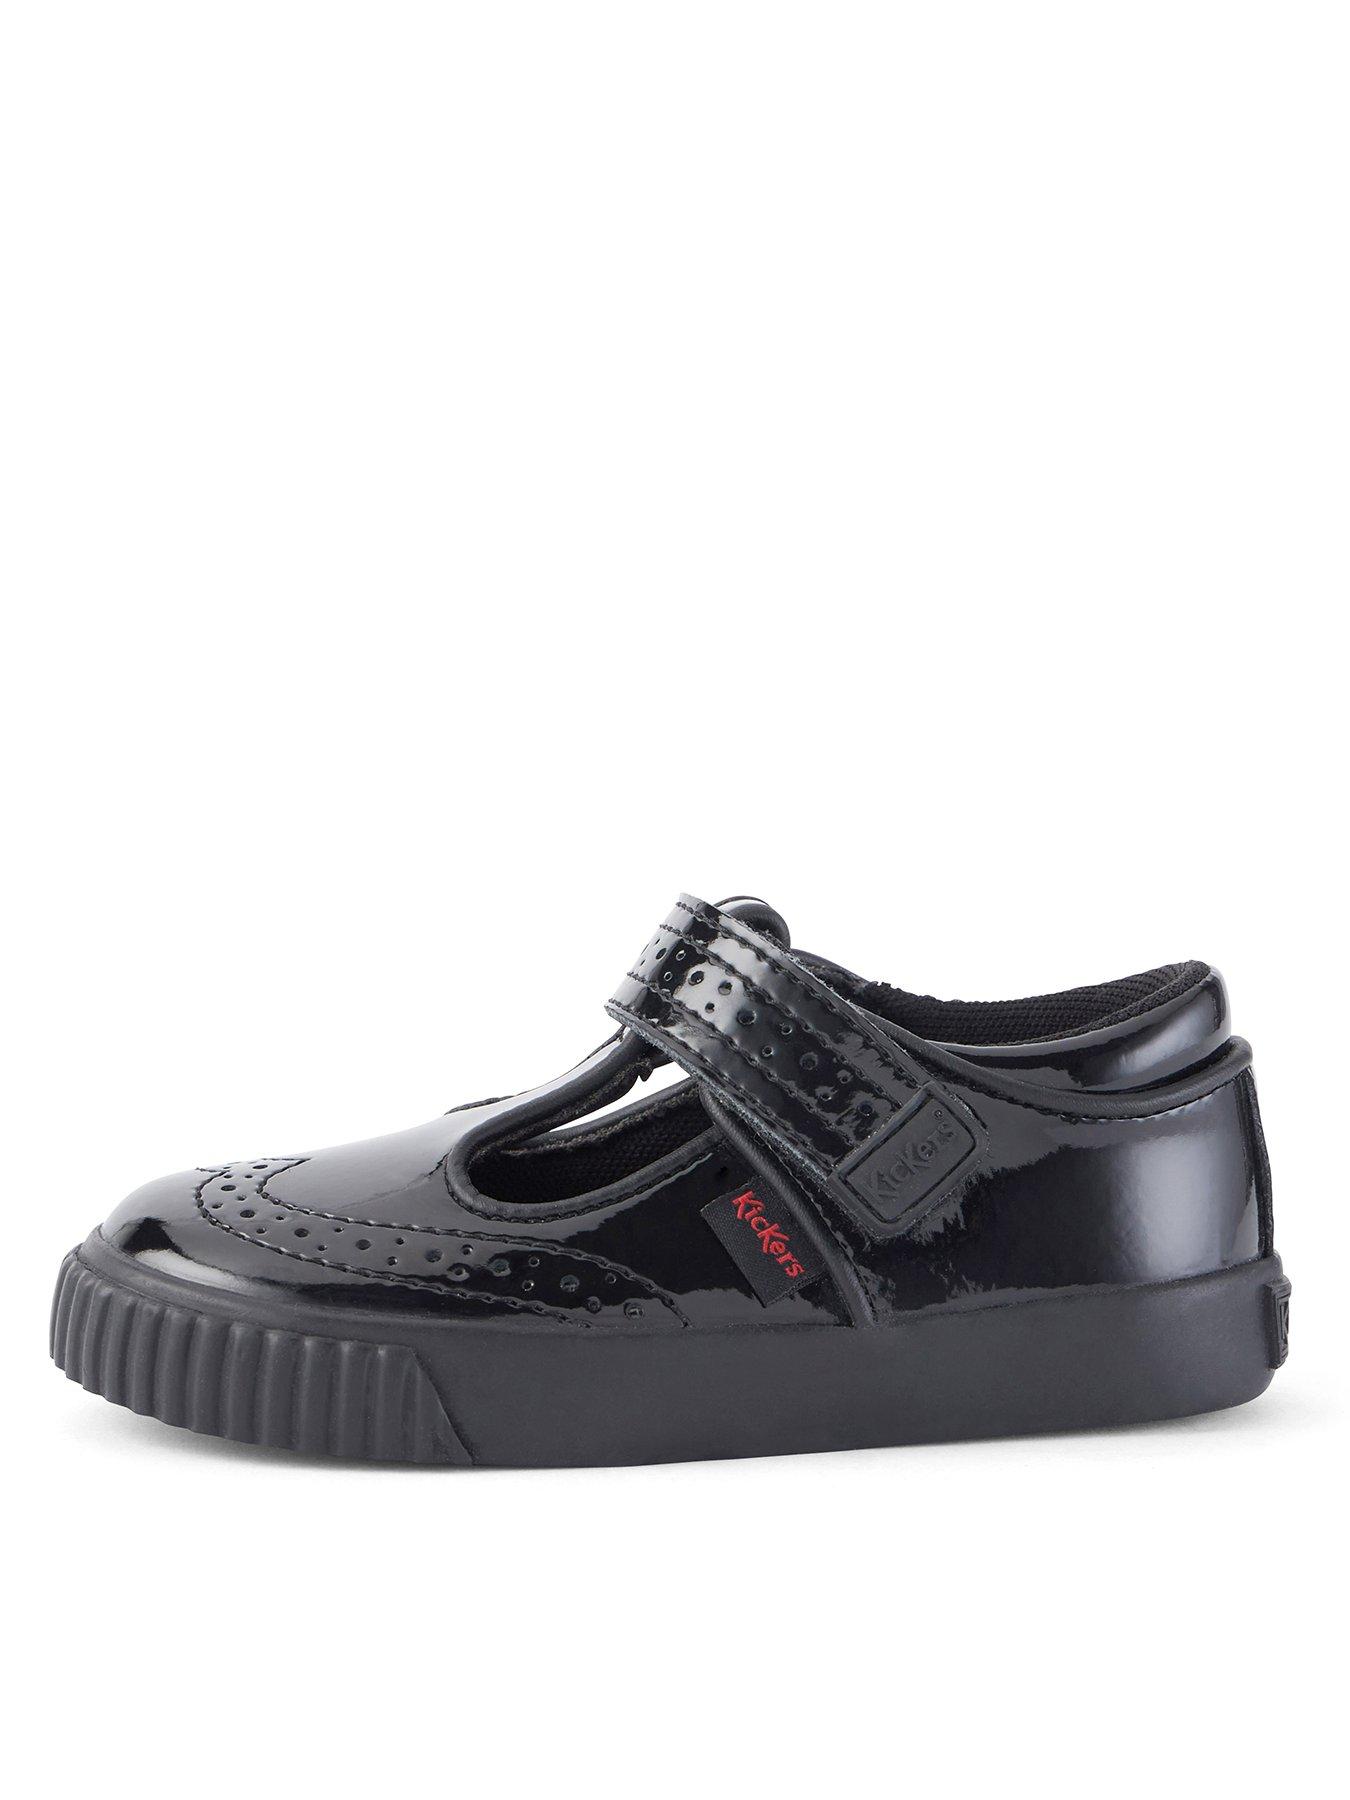 Kickers Tovni Mary Jane Shoes Girls Janes Touch and Close Textured 